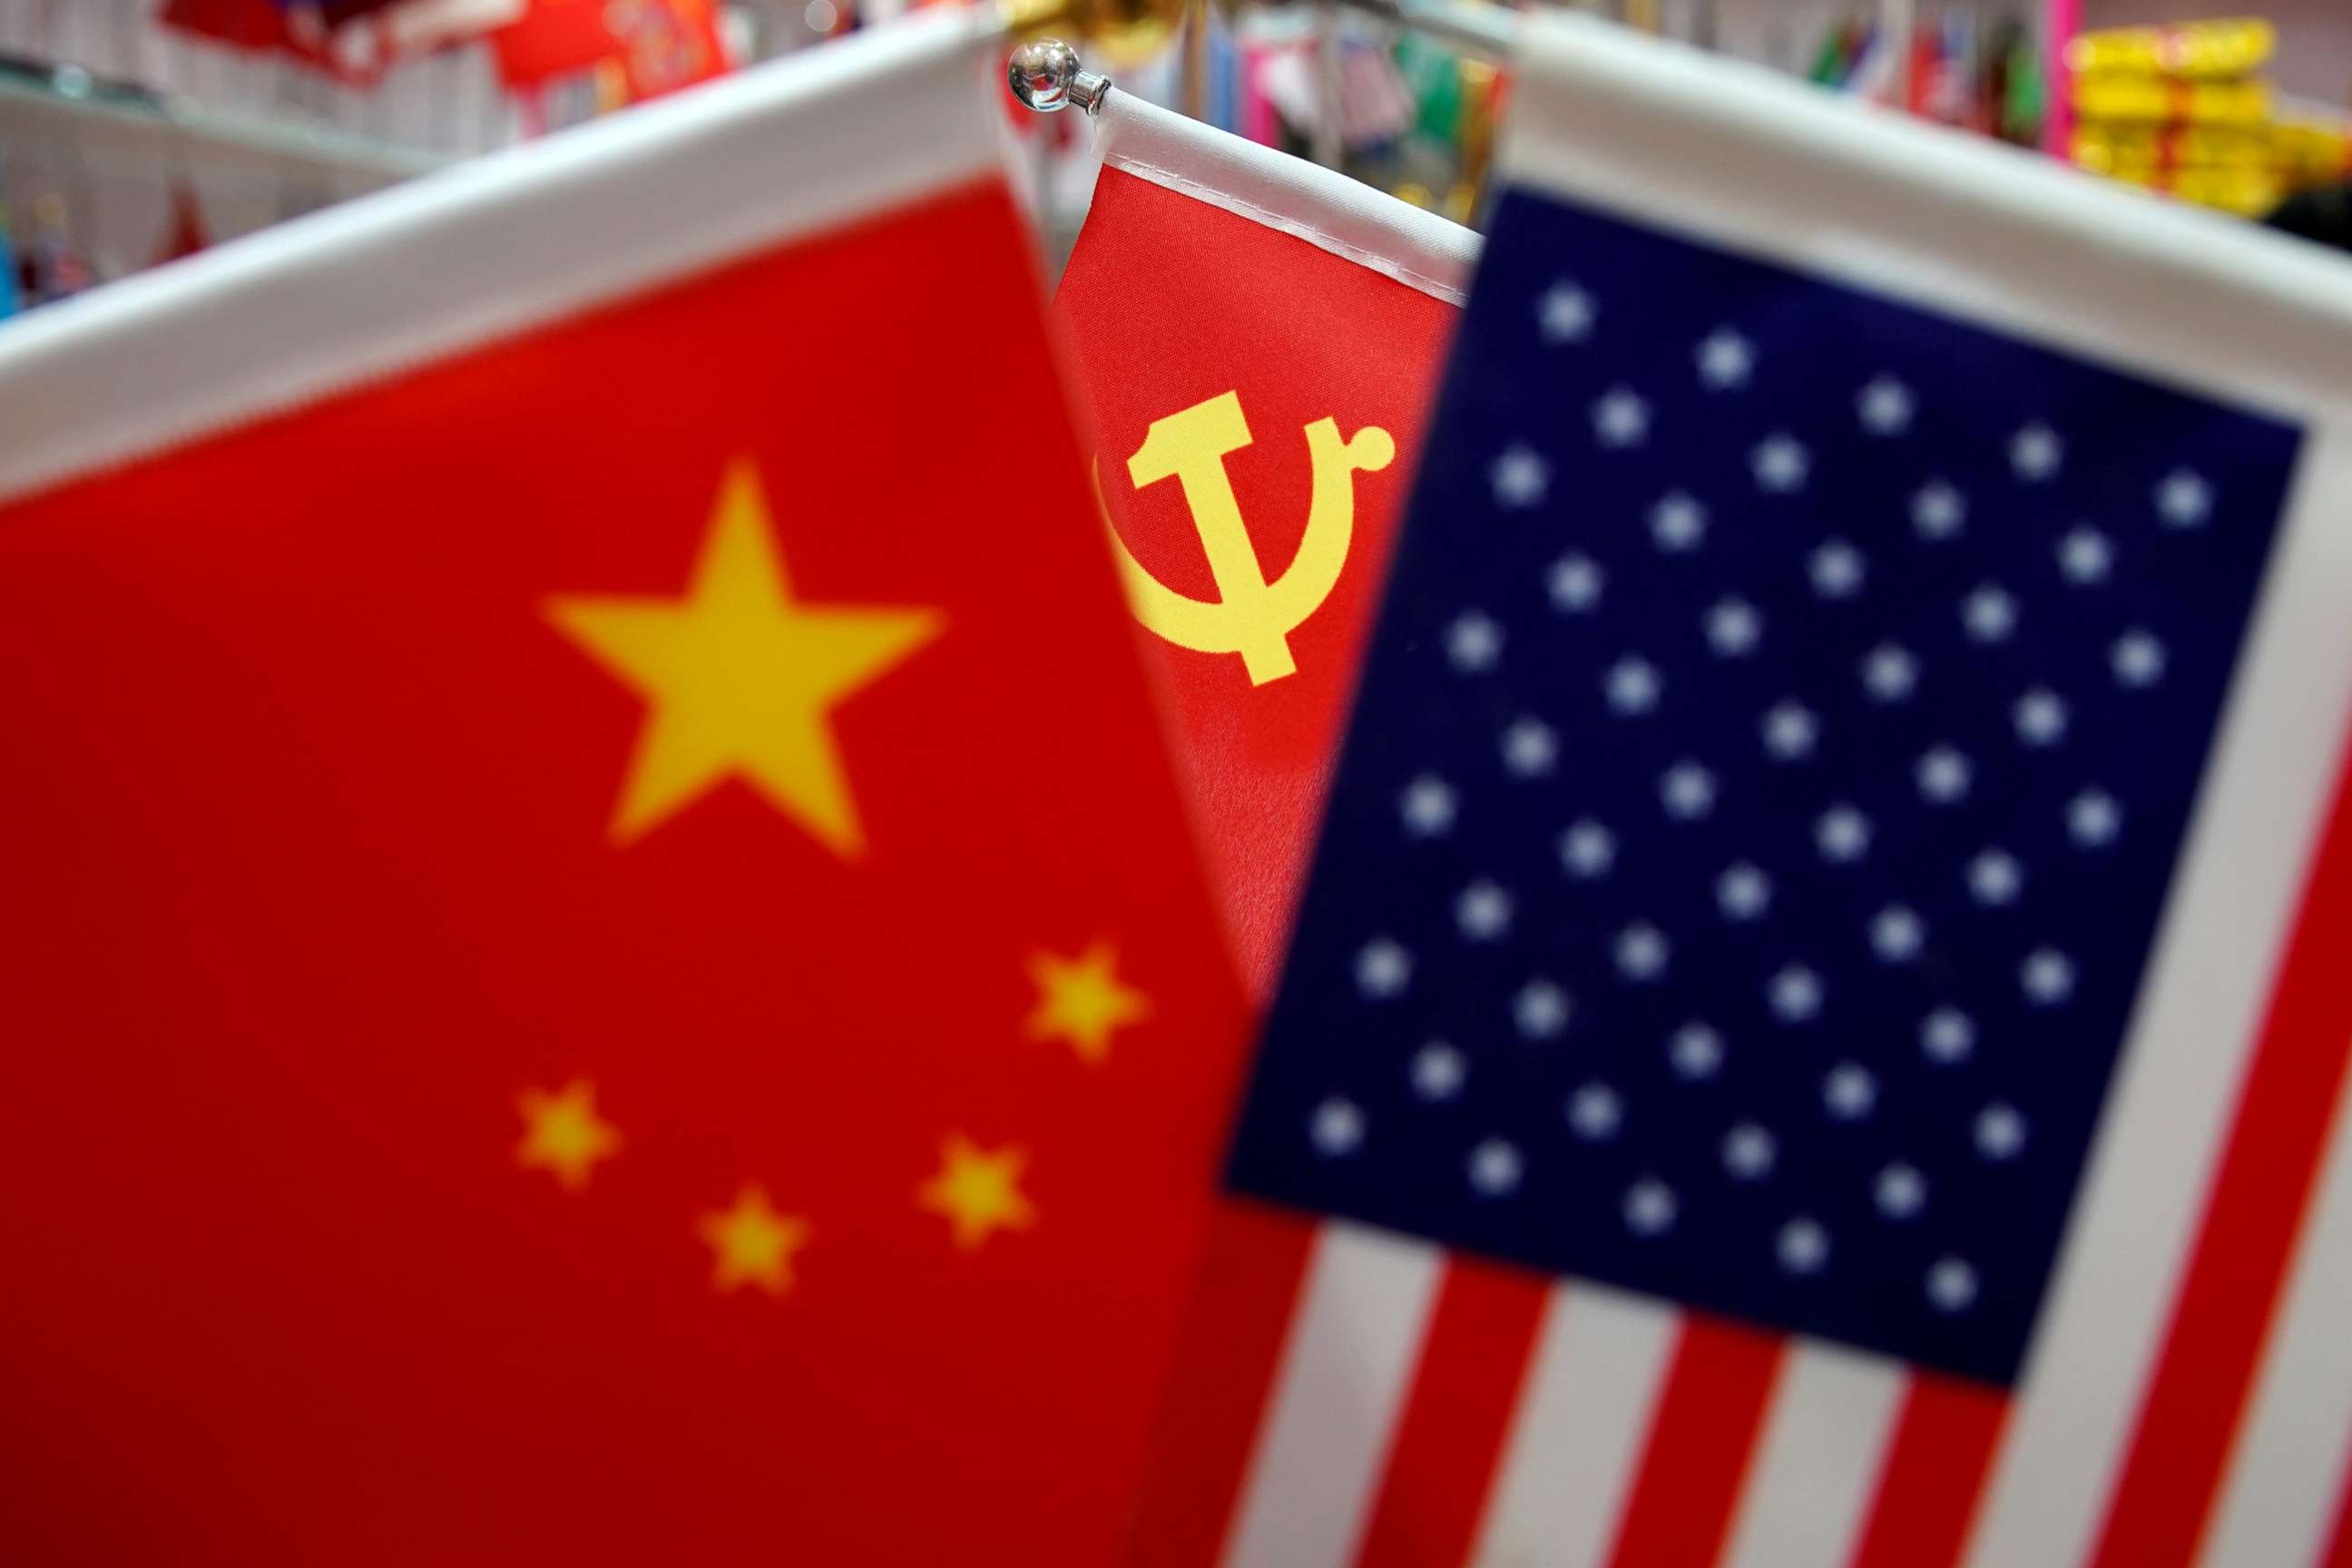 PHOTO: The flags of China, the United States and Chinese Communist Party are displayed in a flag stall at the Yiwu Wholesale Market in Yiwu, Zhejiang province, China, May 10, 2019.